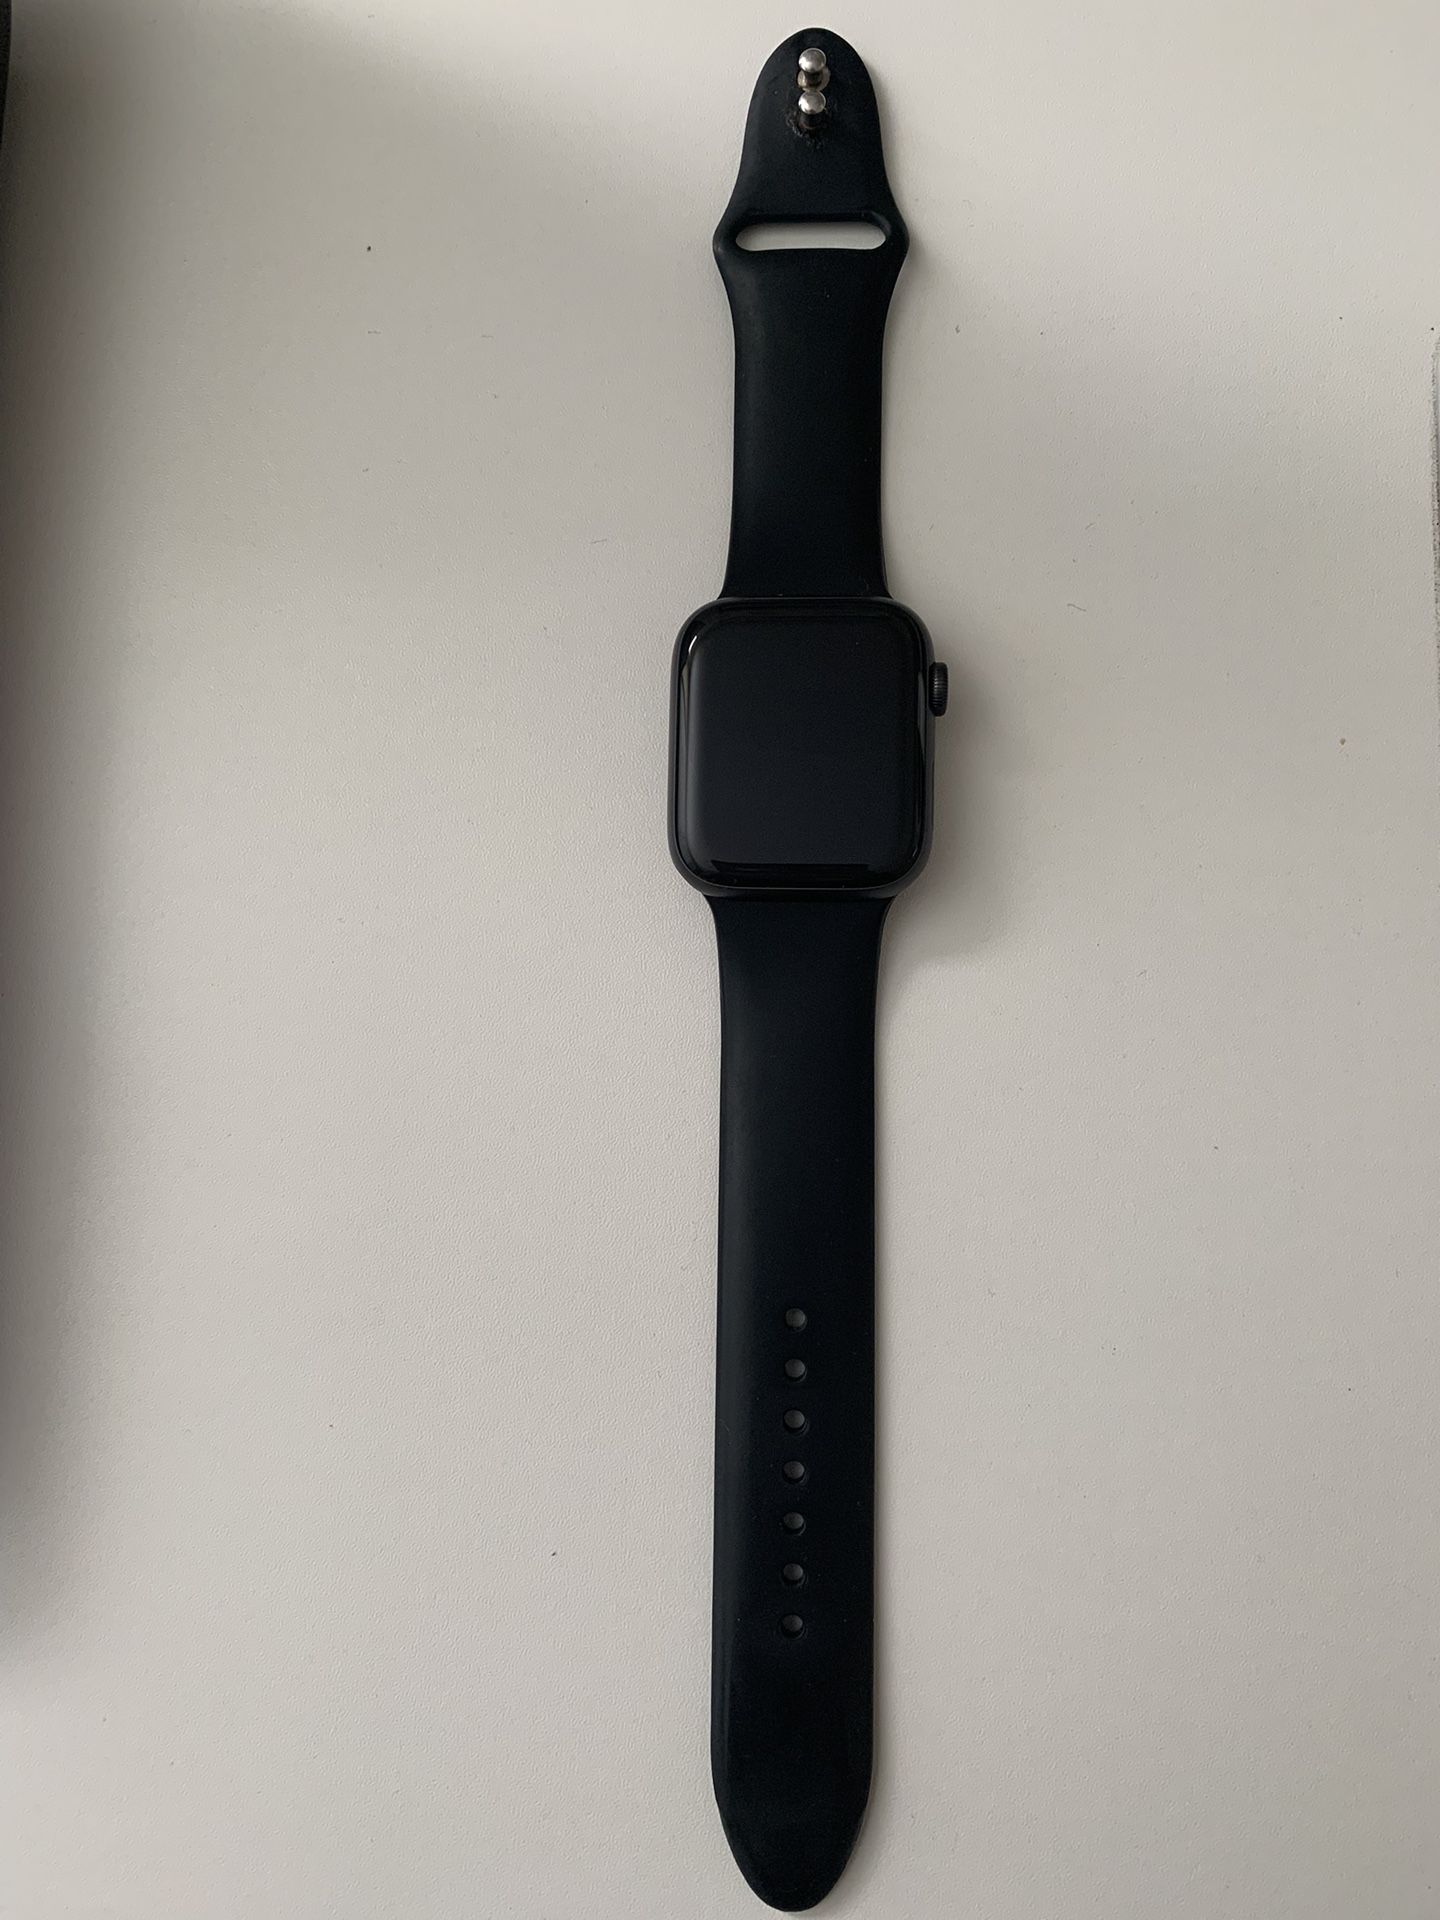 *FOR SALE* Apple Watch Series 5